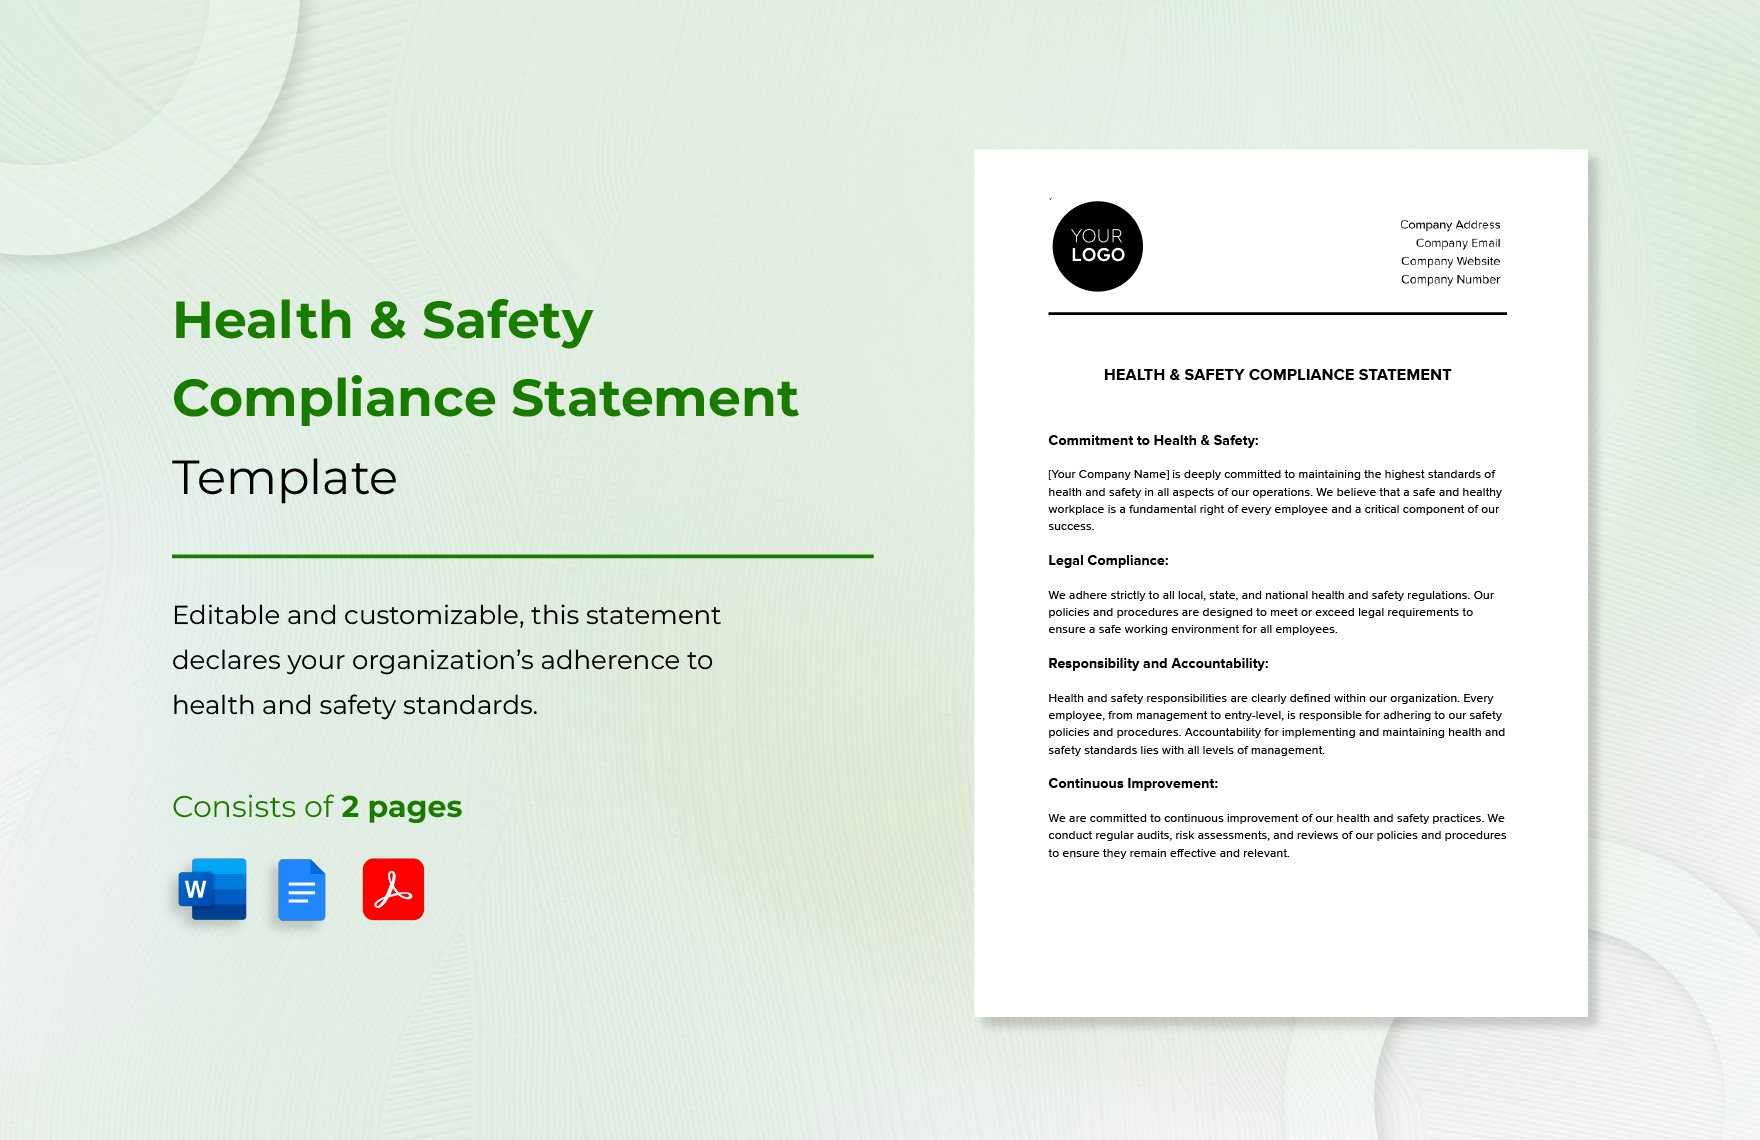 Health & Safety Compliance Statement Template